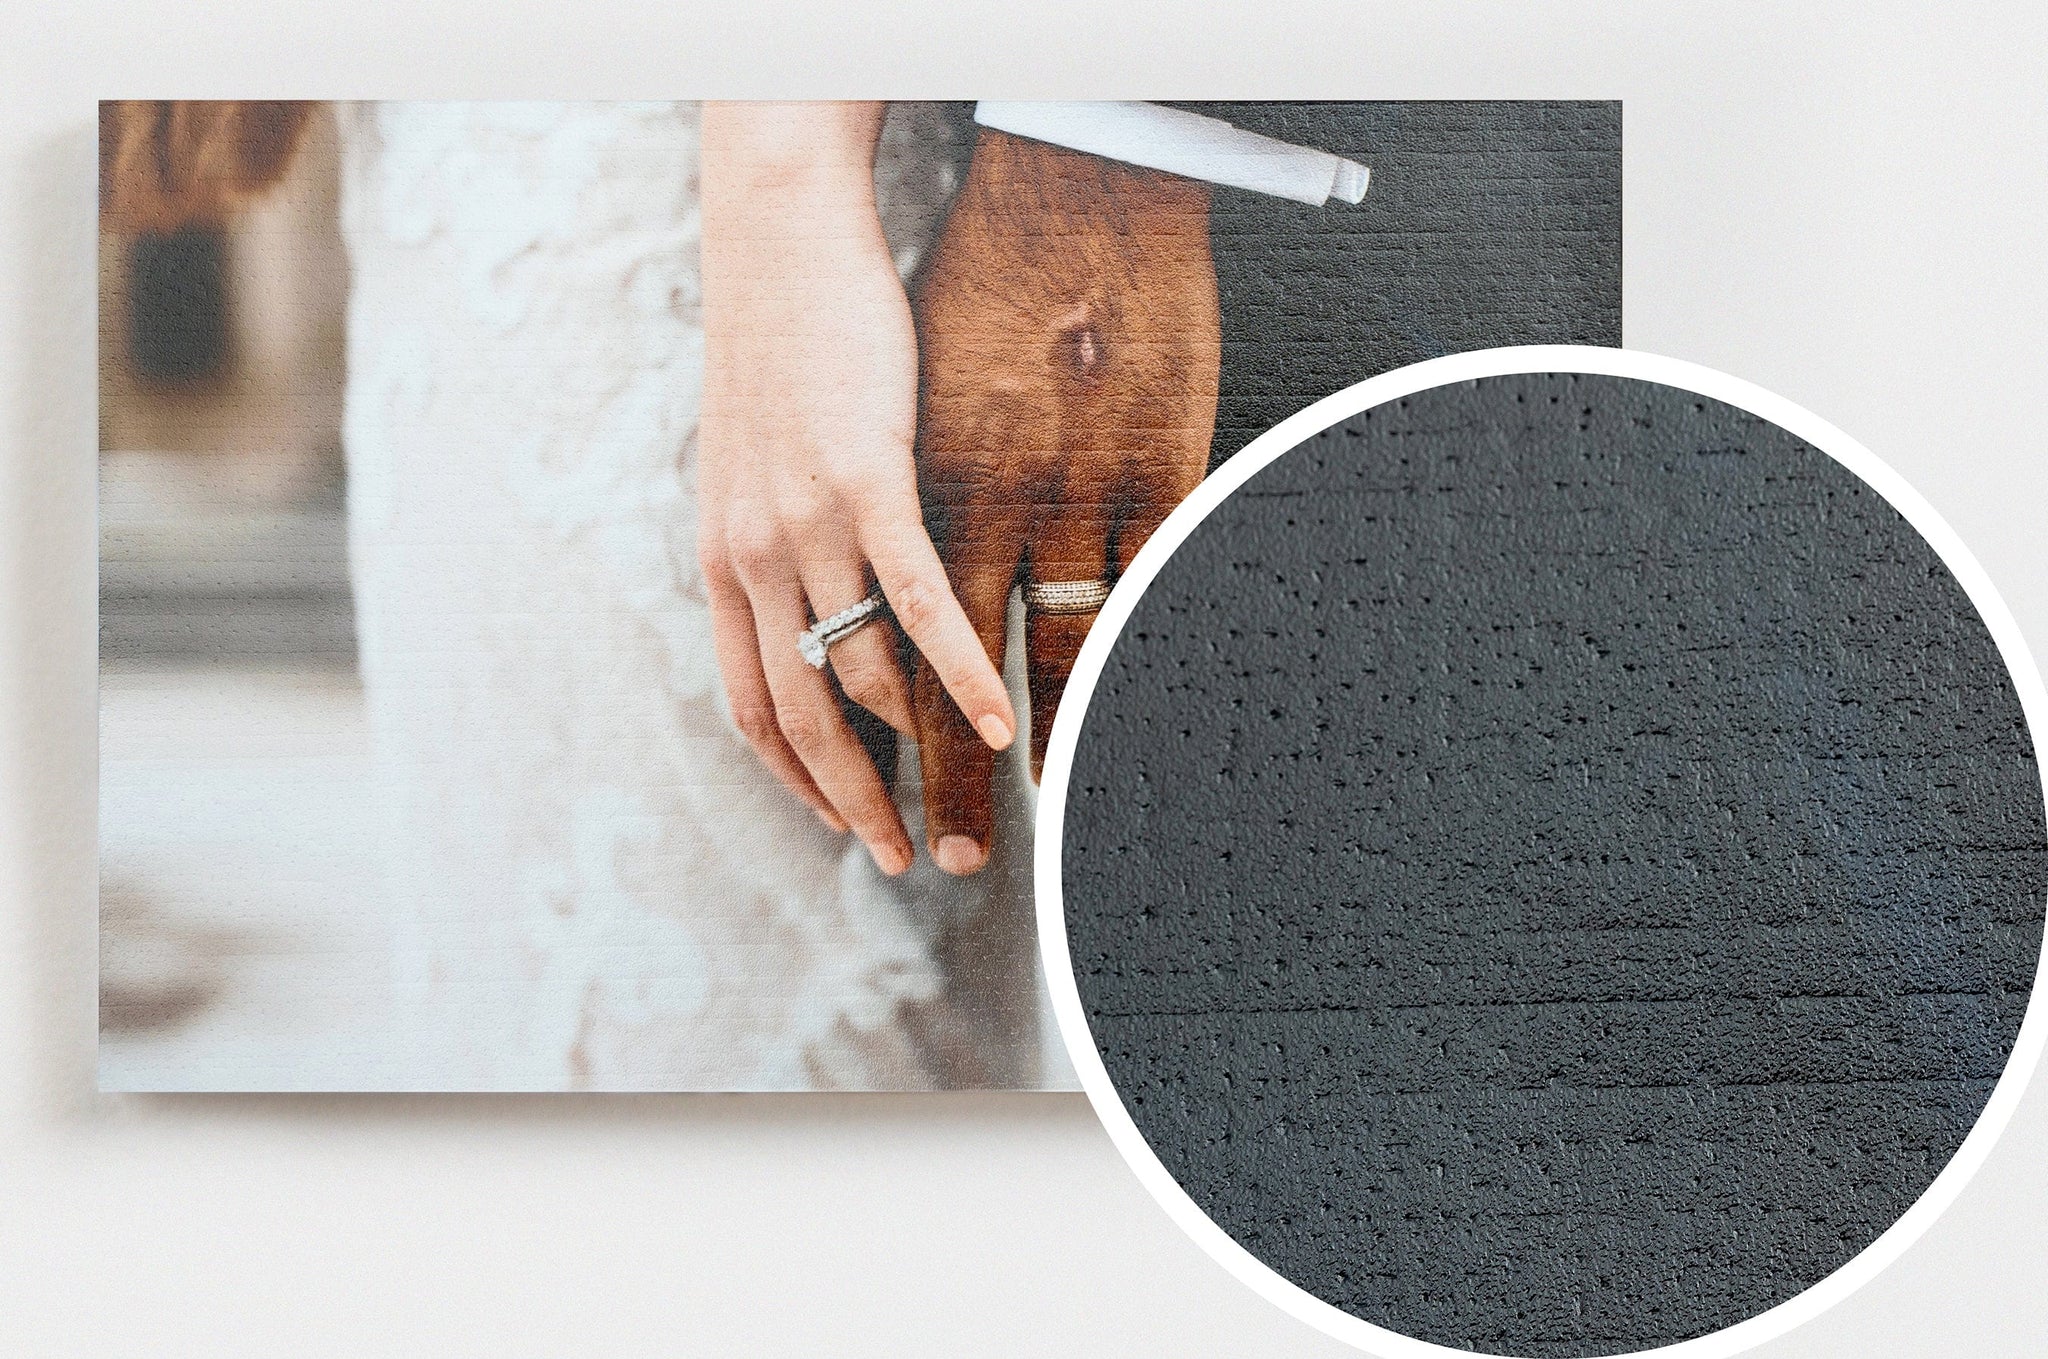 Pearl Photo Print with a close up detail to show the texture of our Lustre Photo Paper with Linen Texture.